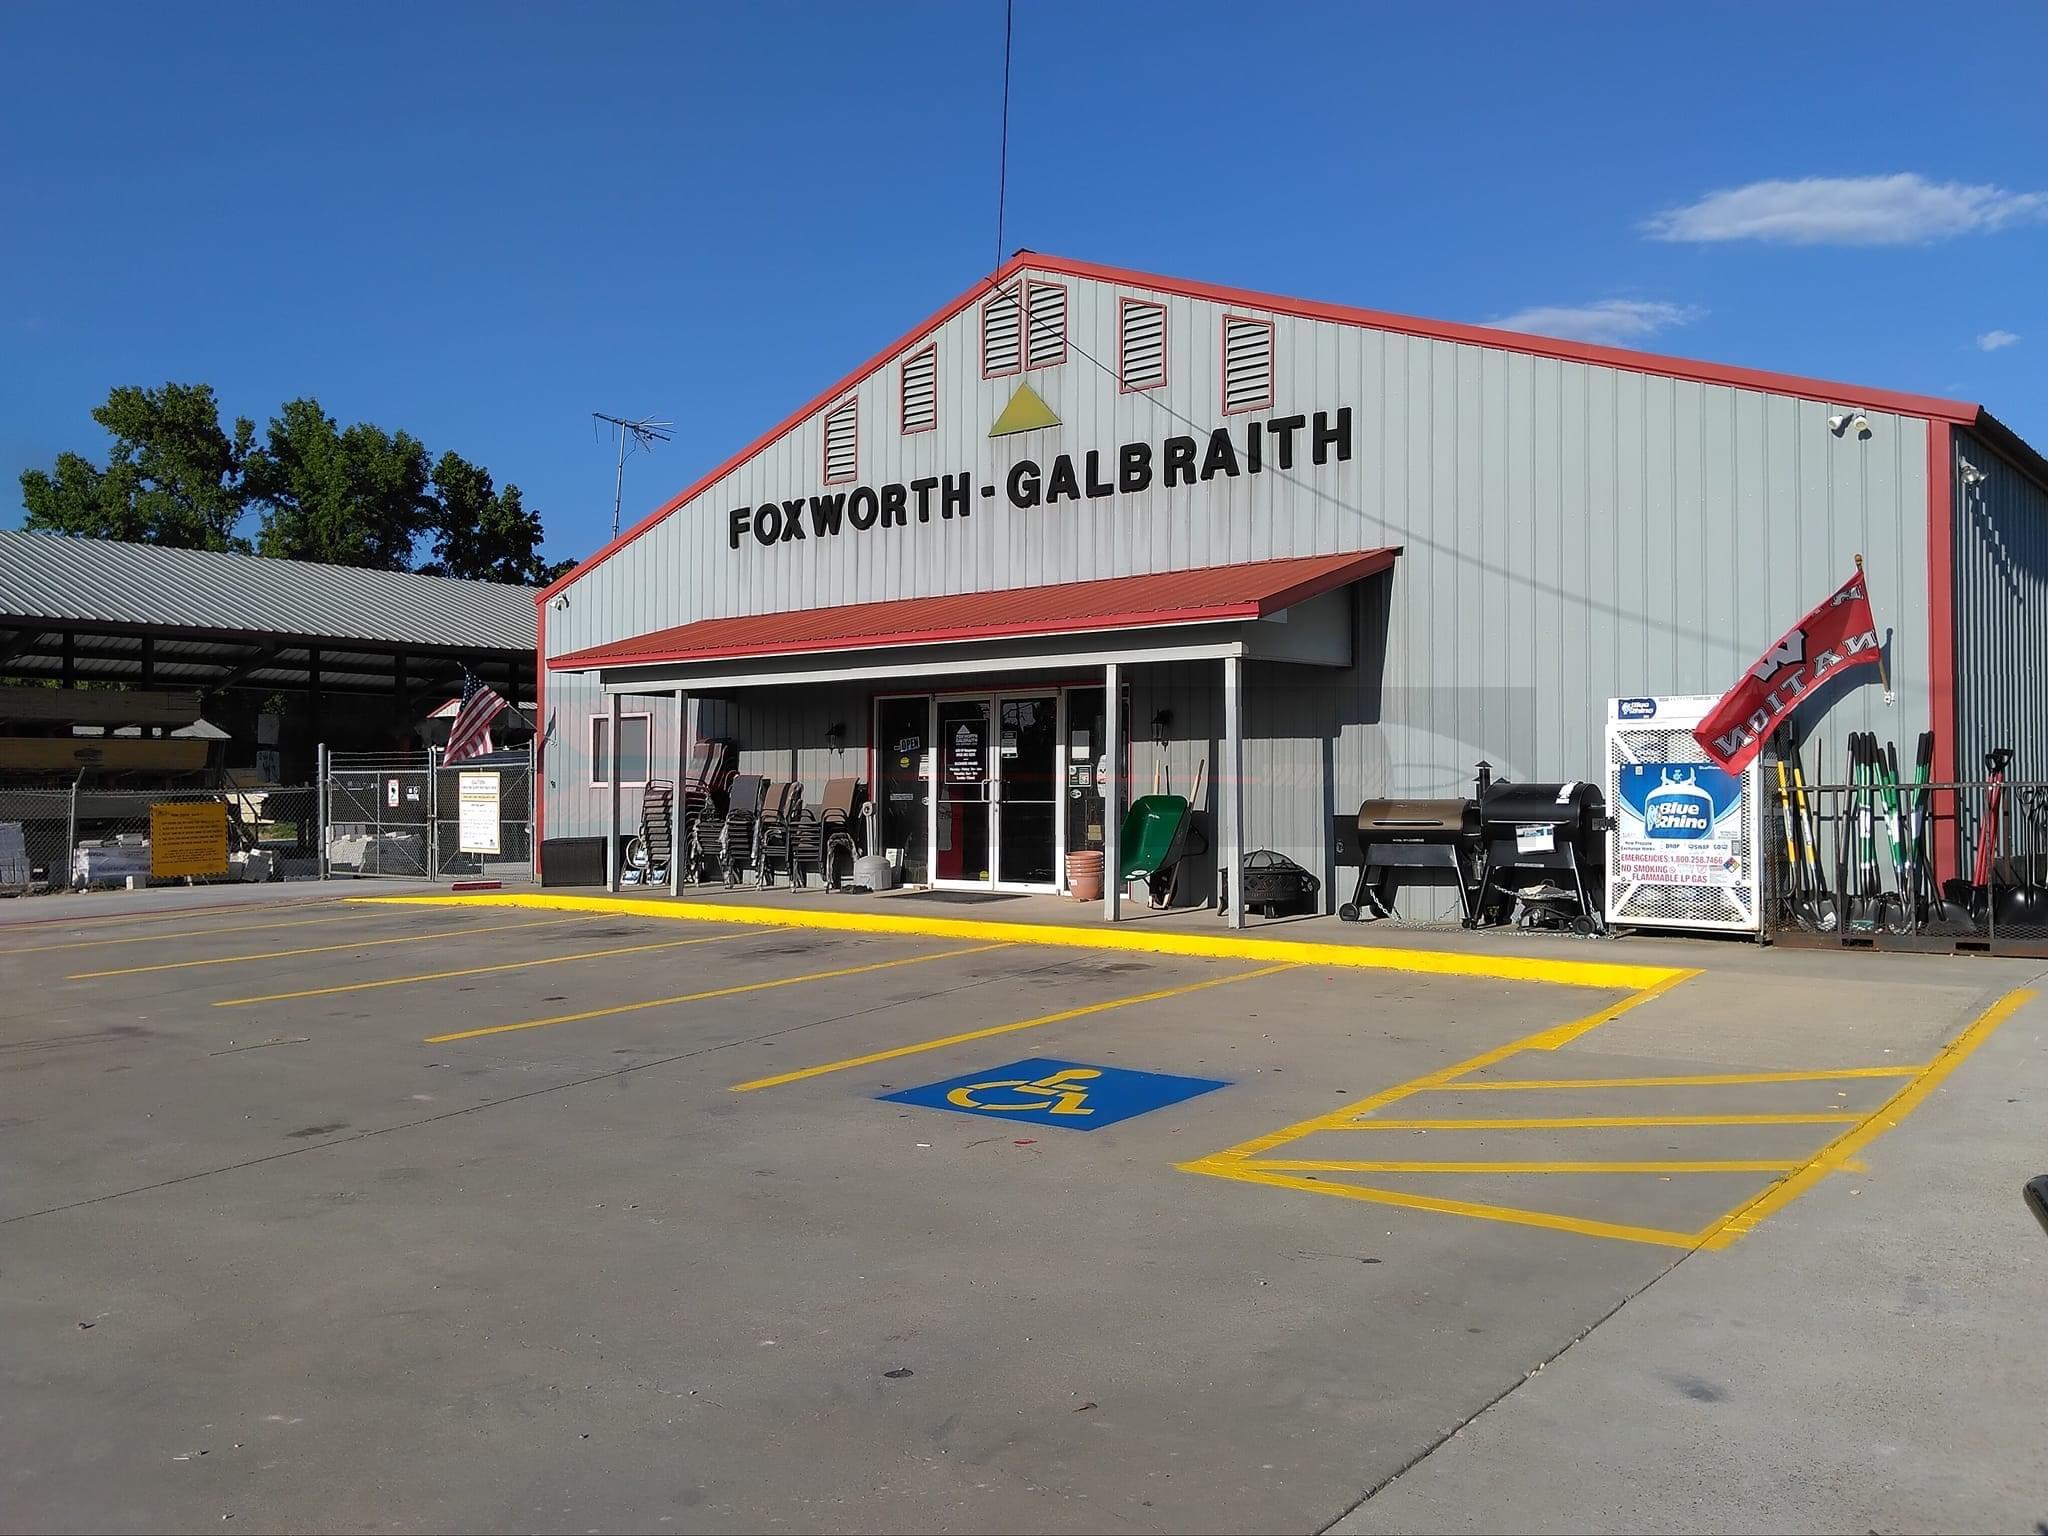 Parking Lot Maintenance and Parking Lot Striping for Foxworth-Galbraith in Winnsboro, Texas